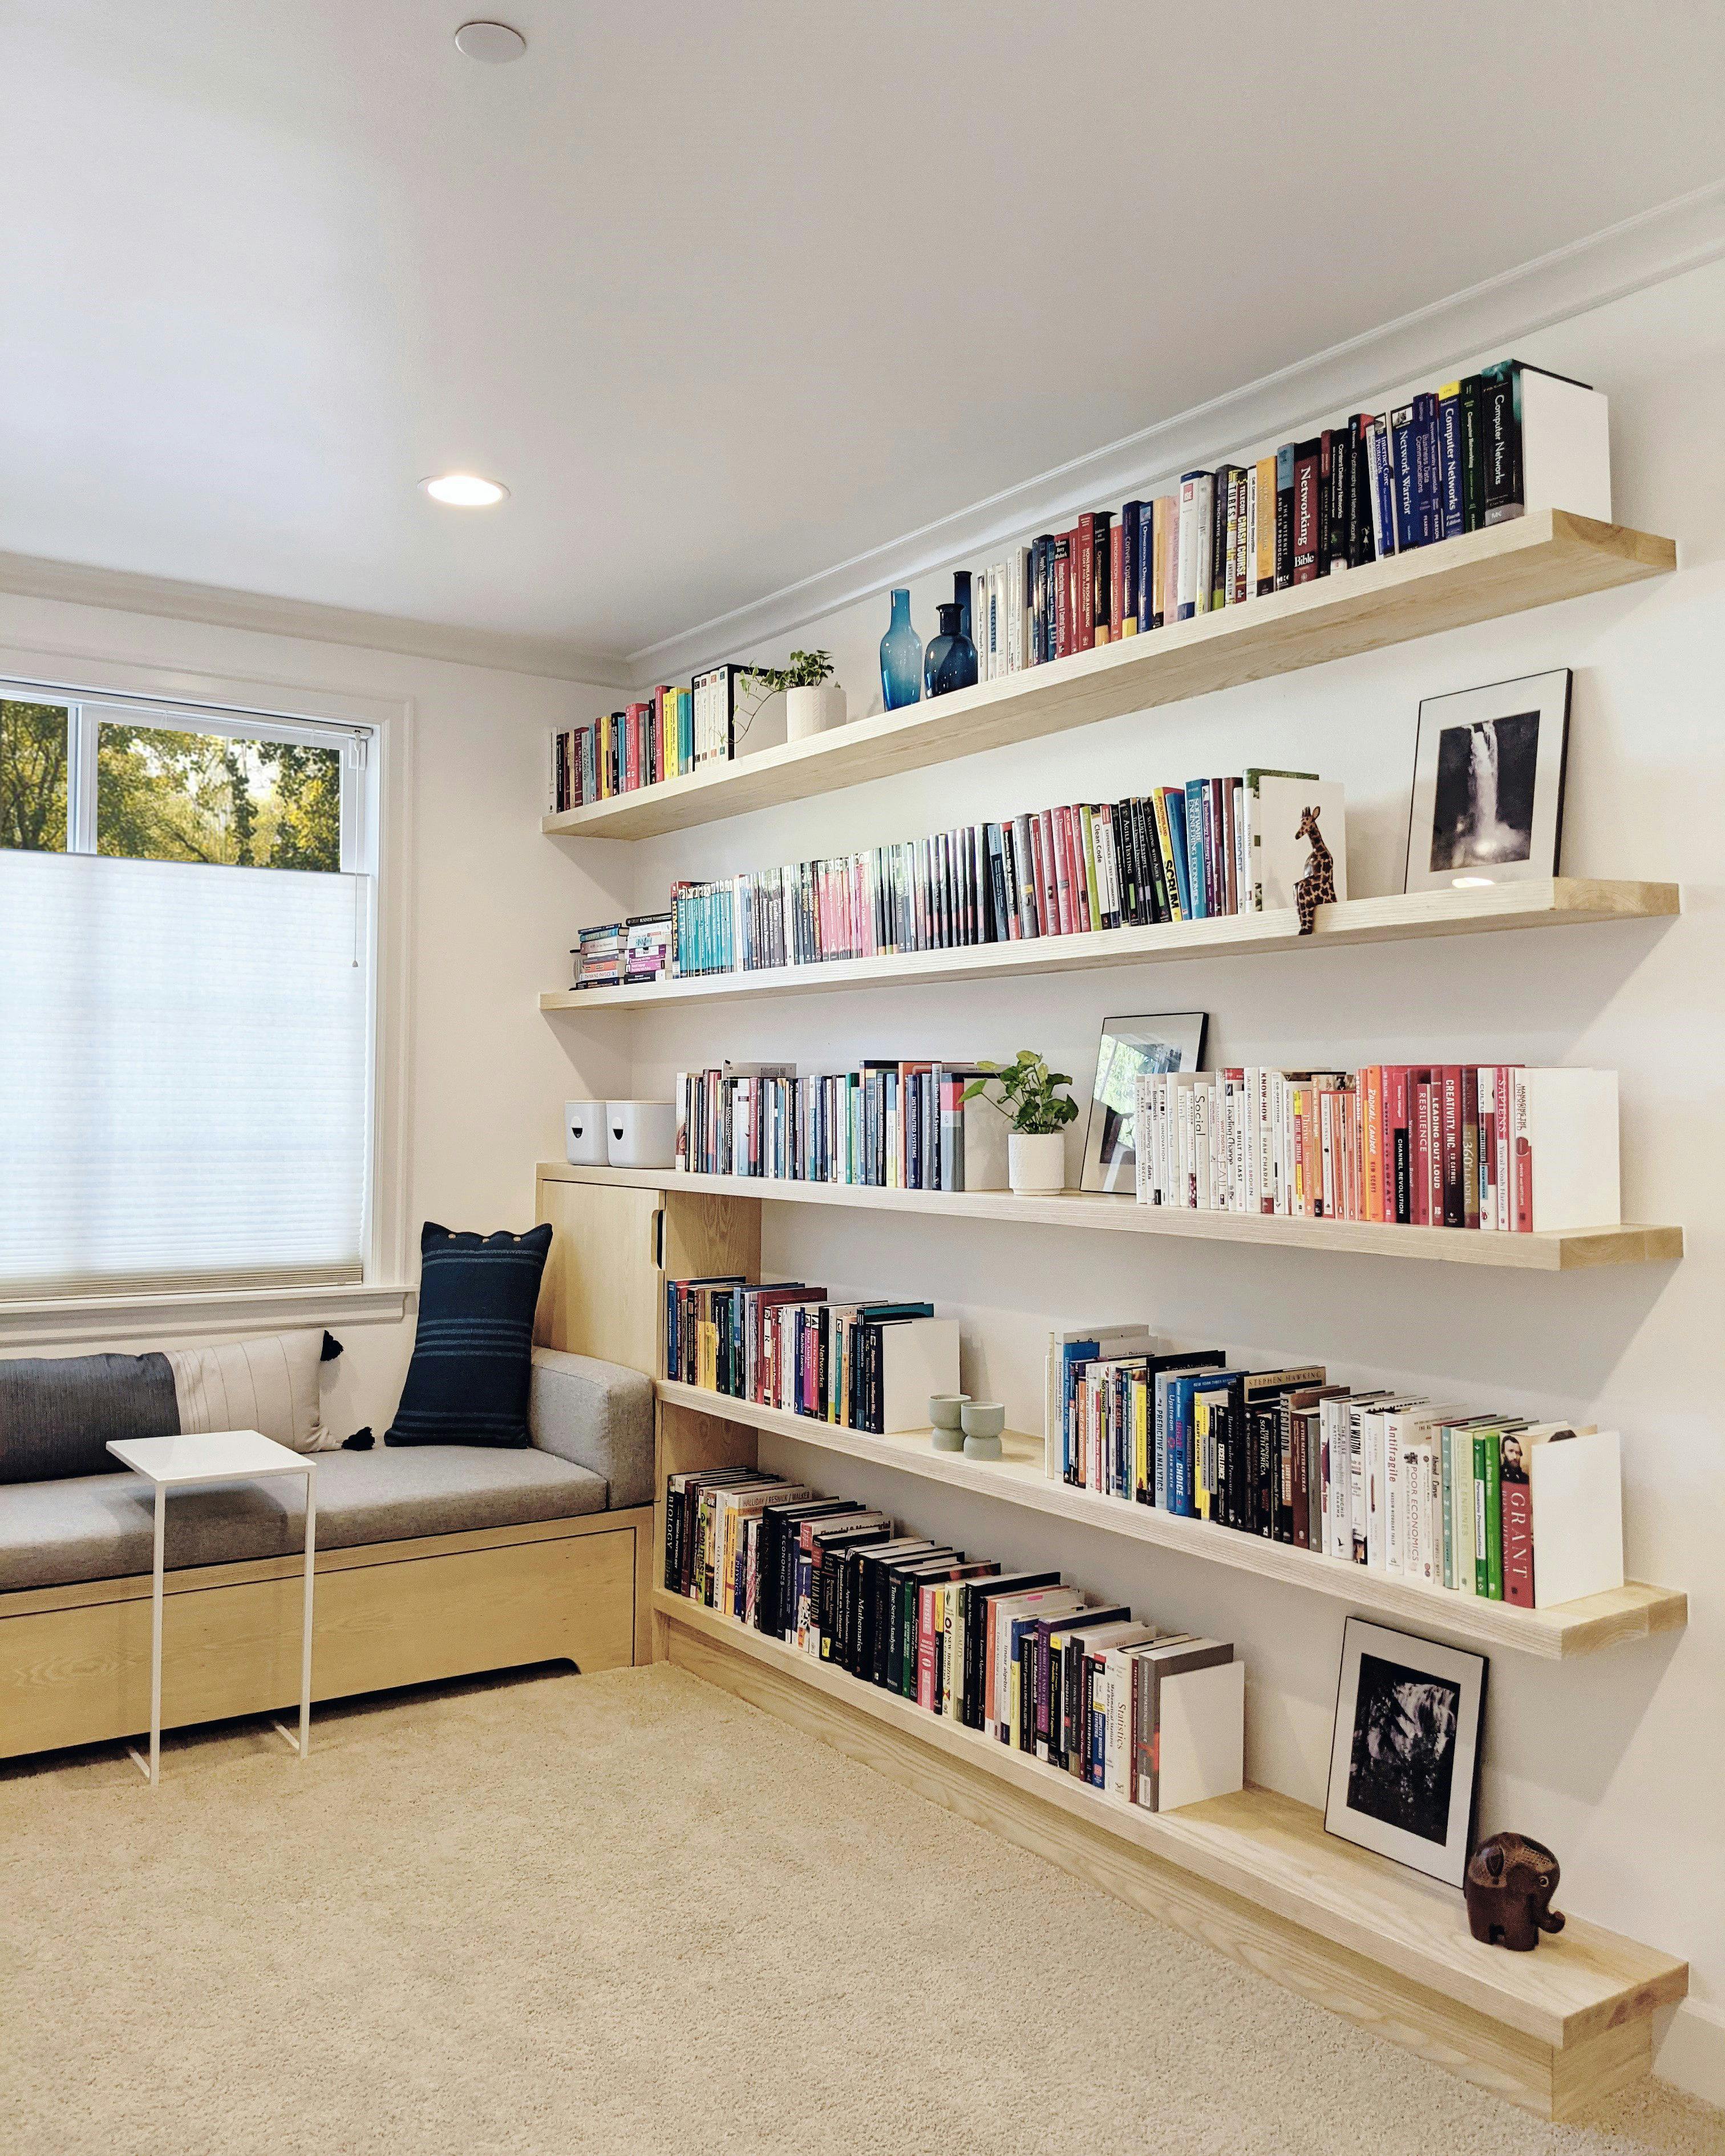 Home Office Library Wall designed by Persimmon Design